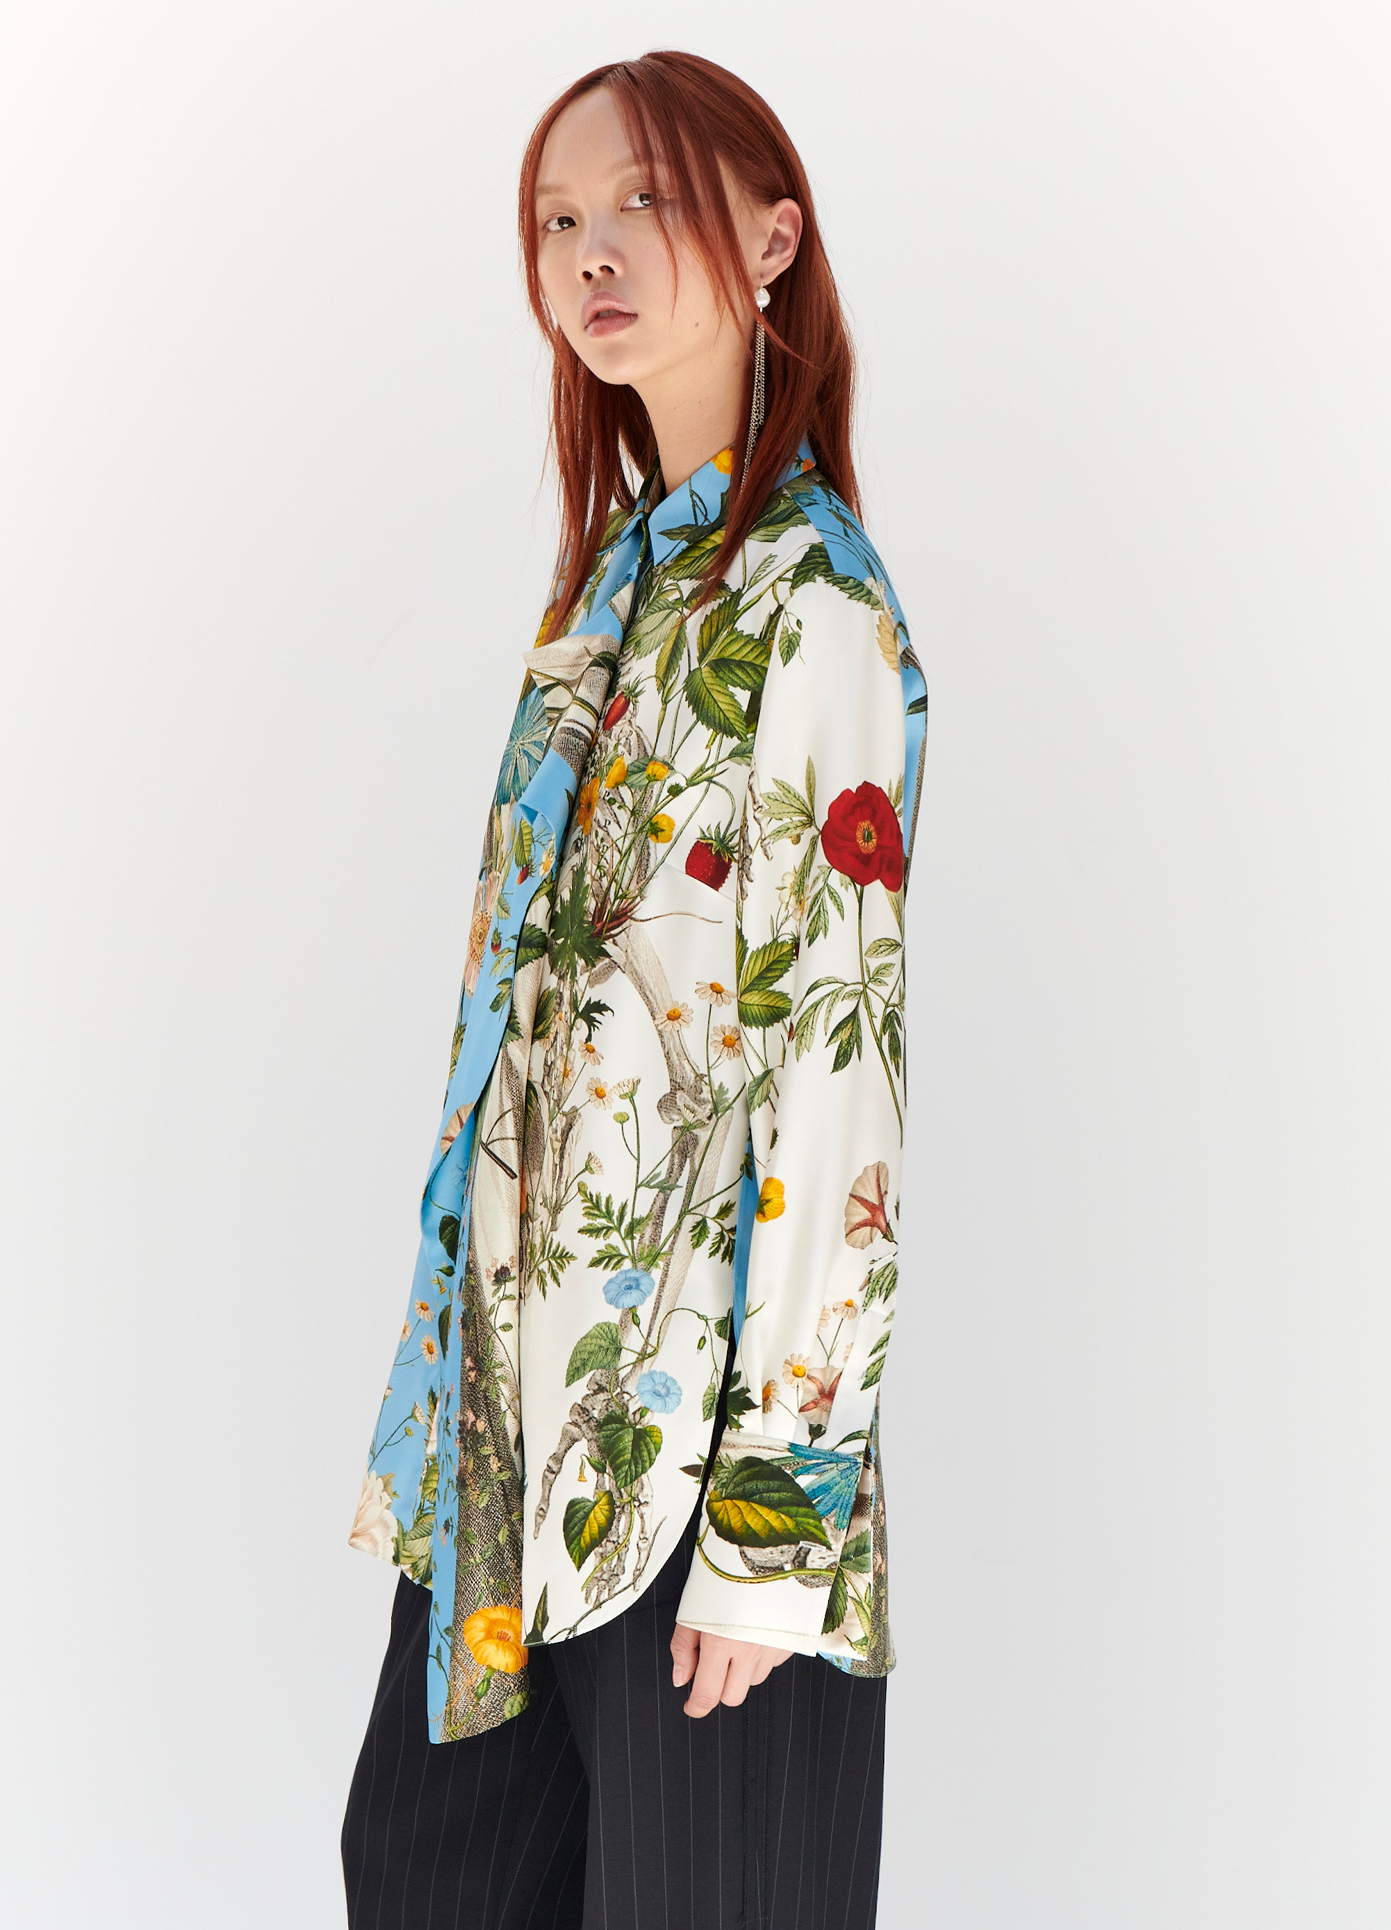 MONSE Floral Skeleton Combo Print Blouse in Blue and Ivory Multi on model side view